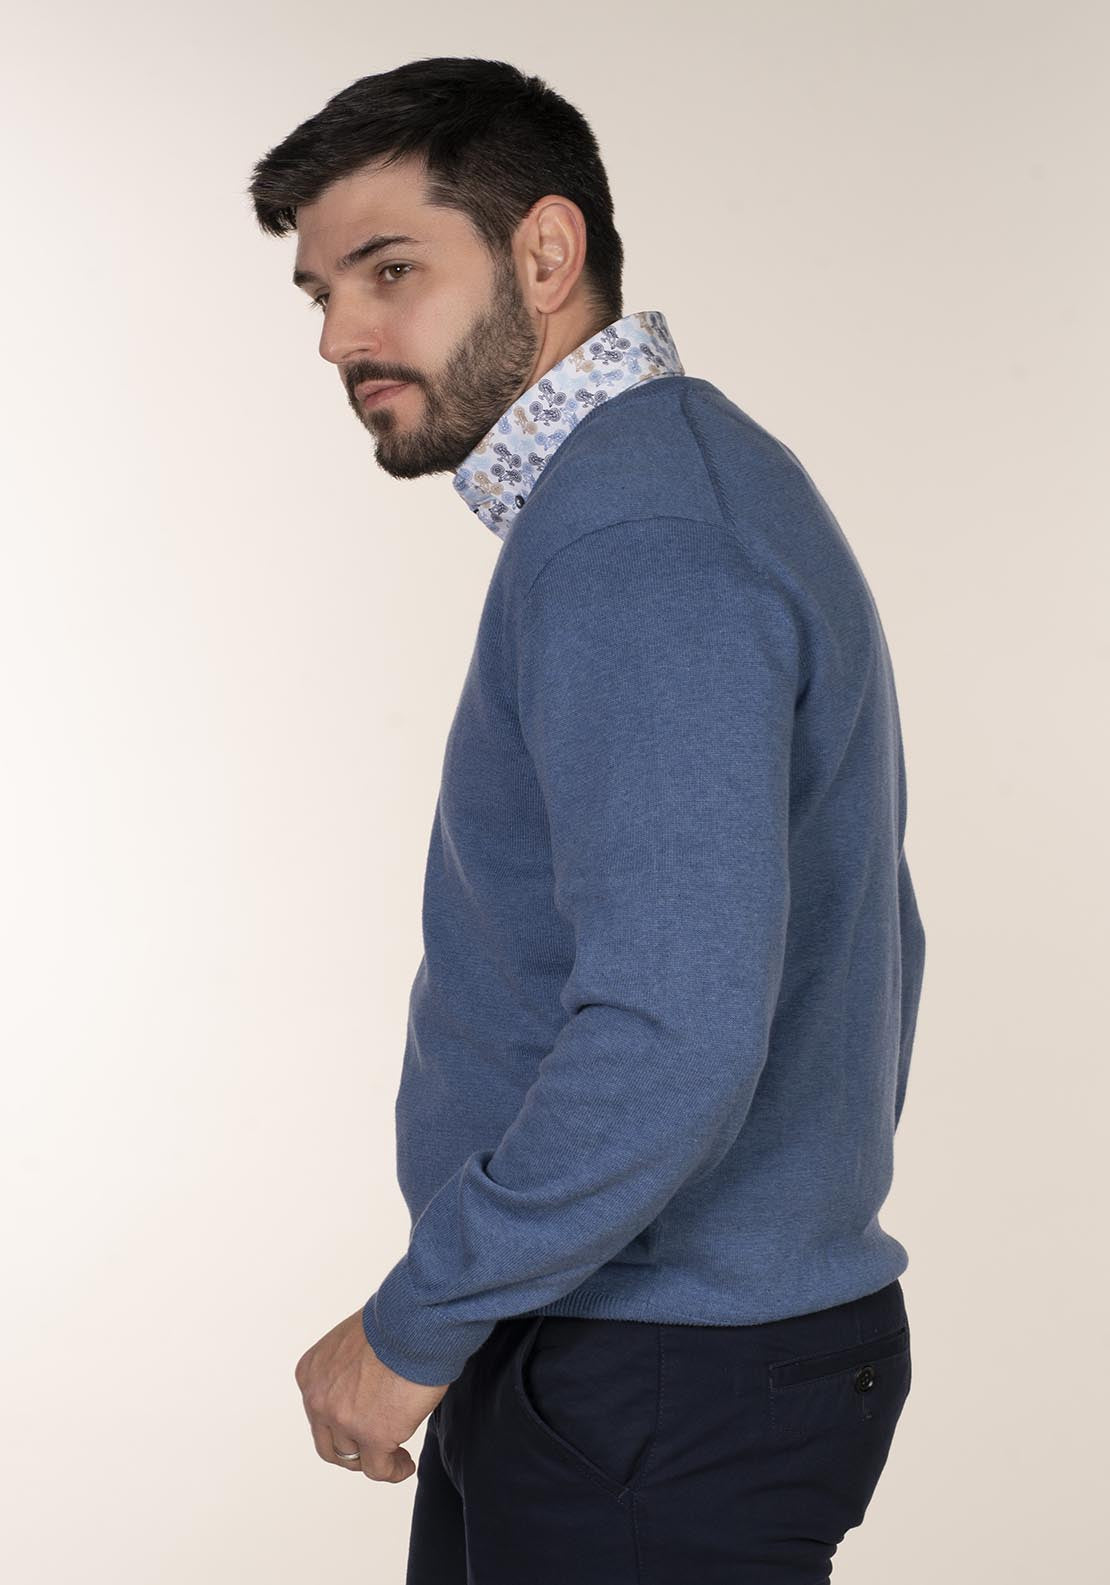 Yeats Plain Cotton V Neck Sweaters - Blue 6 Shaws Department Stores